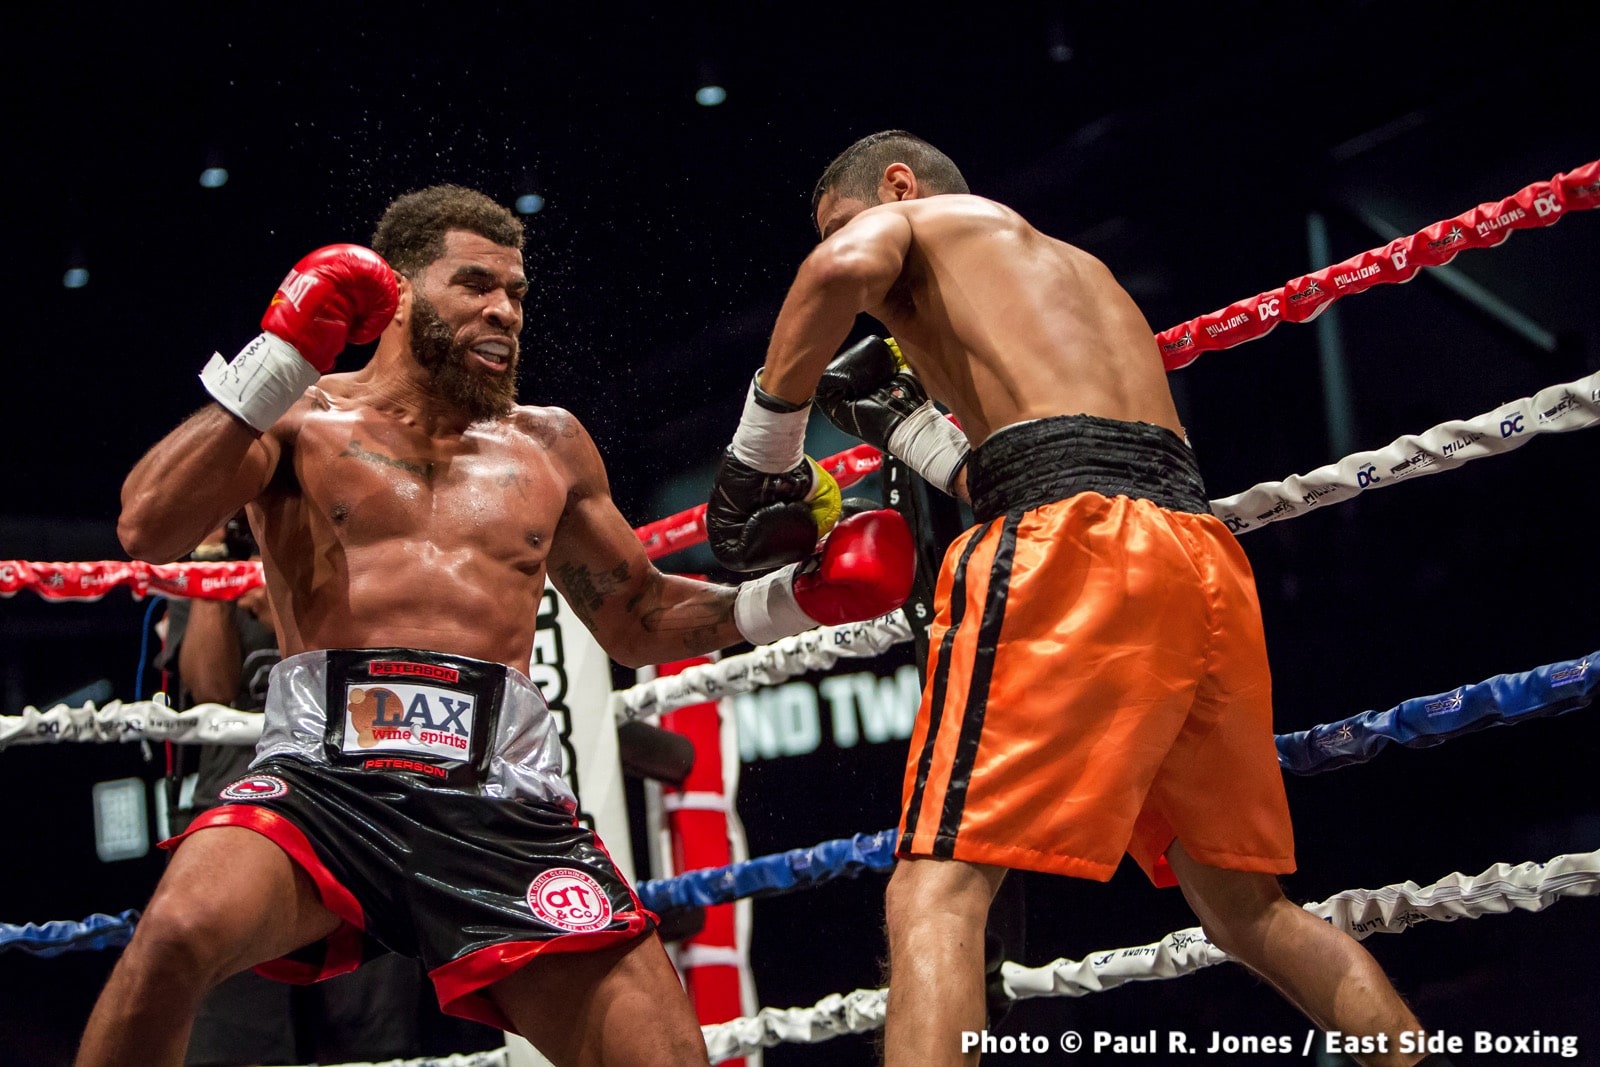 Anthony Peterson, Saul Corral boxing image / photo